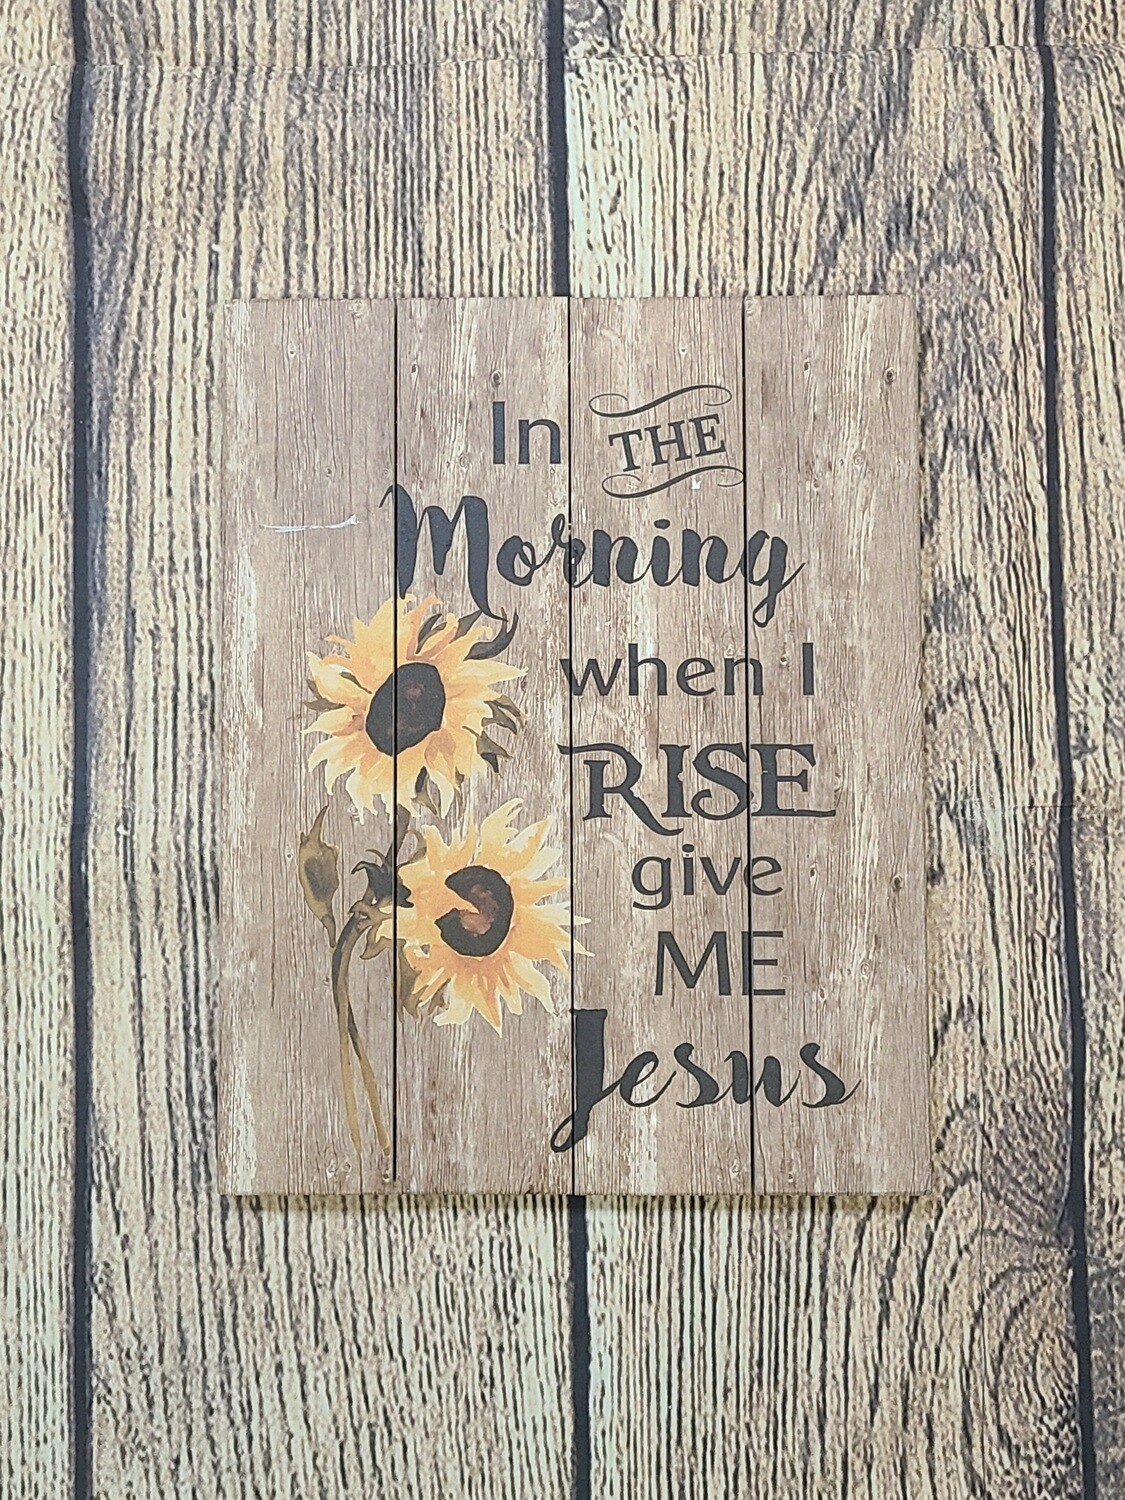 In the Morning when I Rise Give Me Jesus Rustic Pallet Wall Art Decor